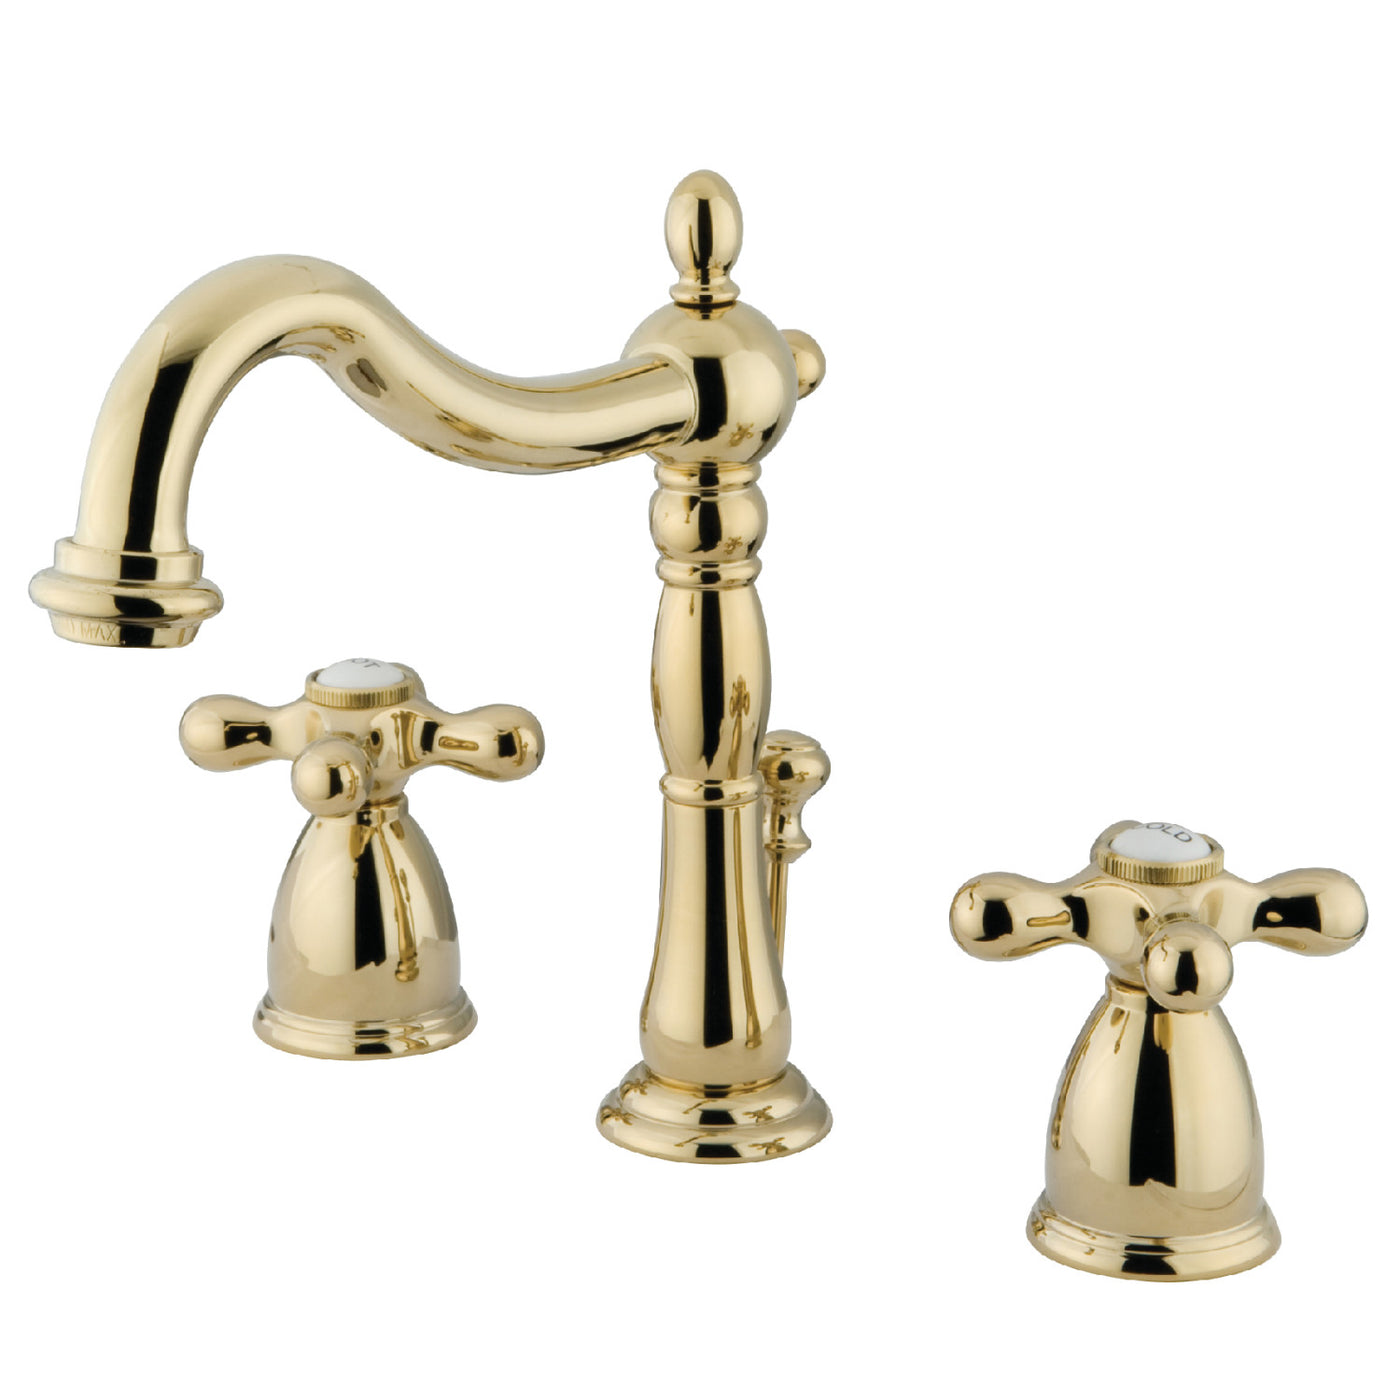 Elements of Design EB1972AX Widespread Bathroom Faucet with Brass Pop-Up, Polished Brass